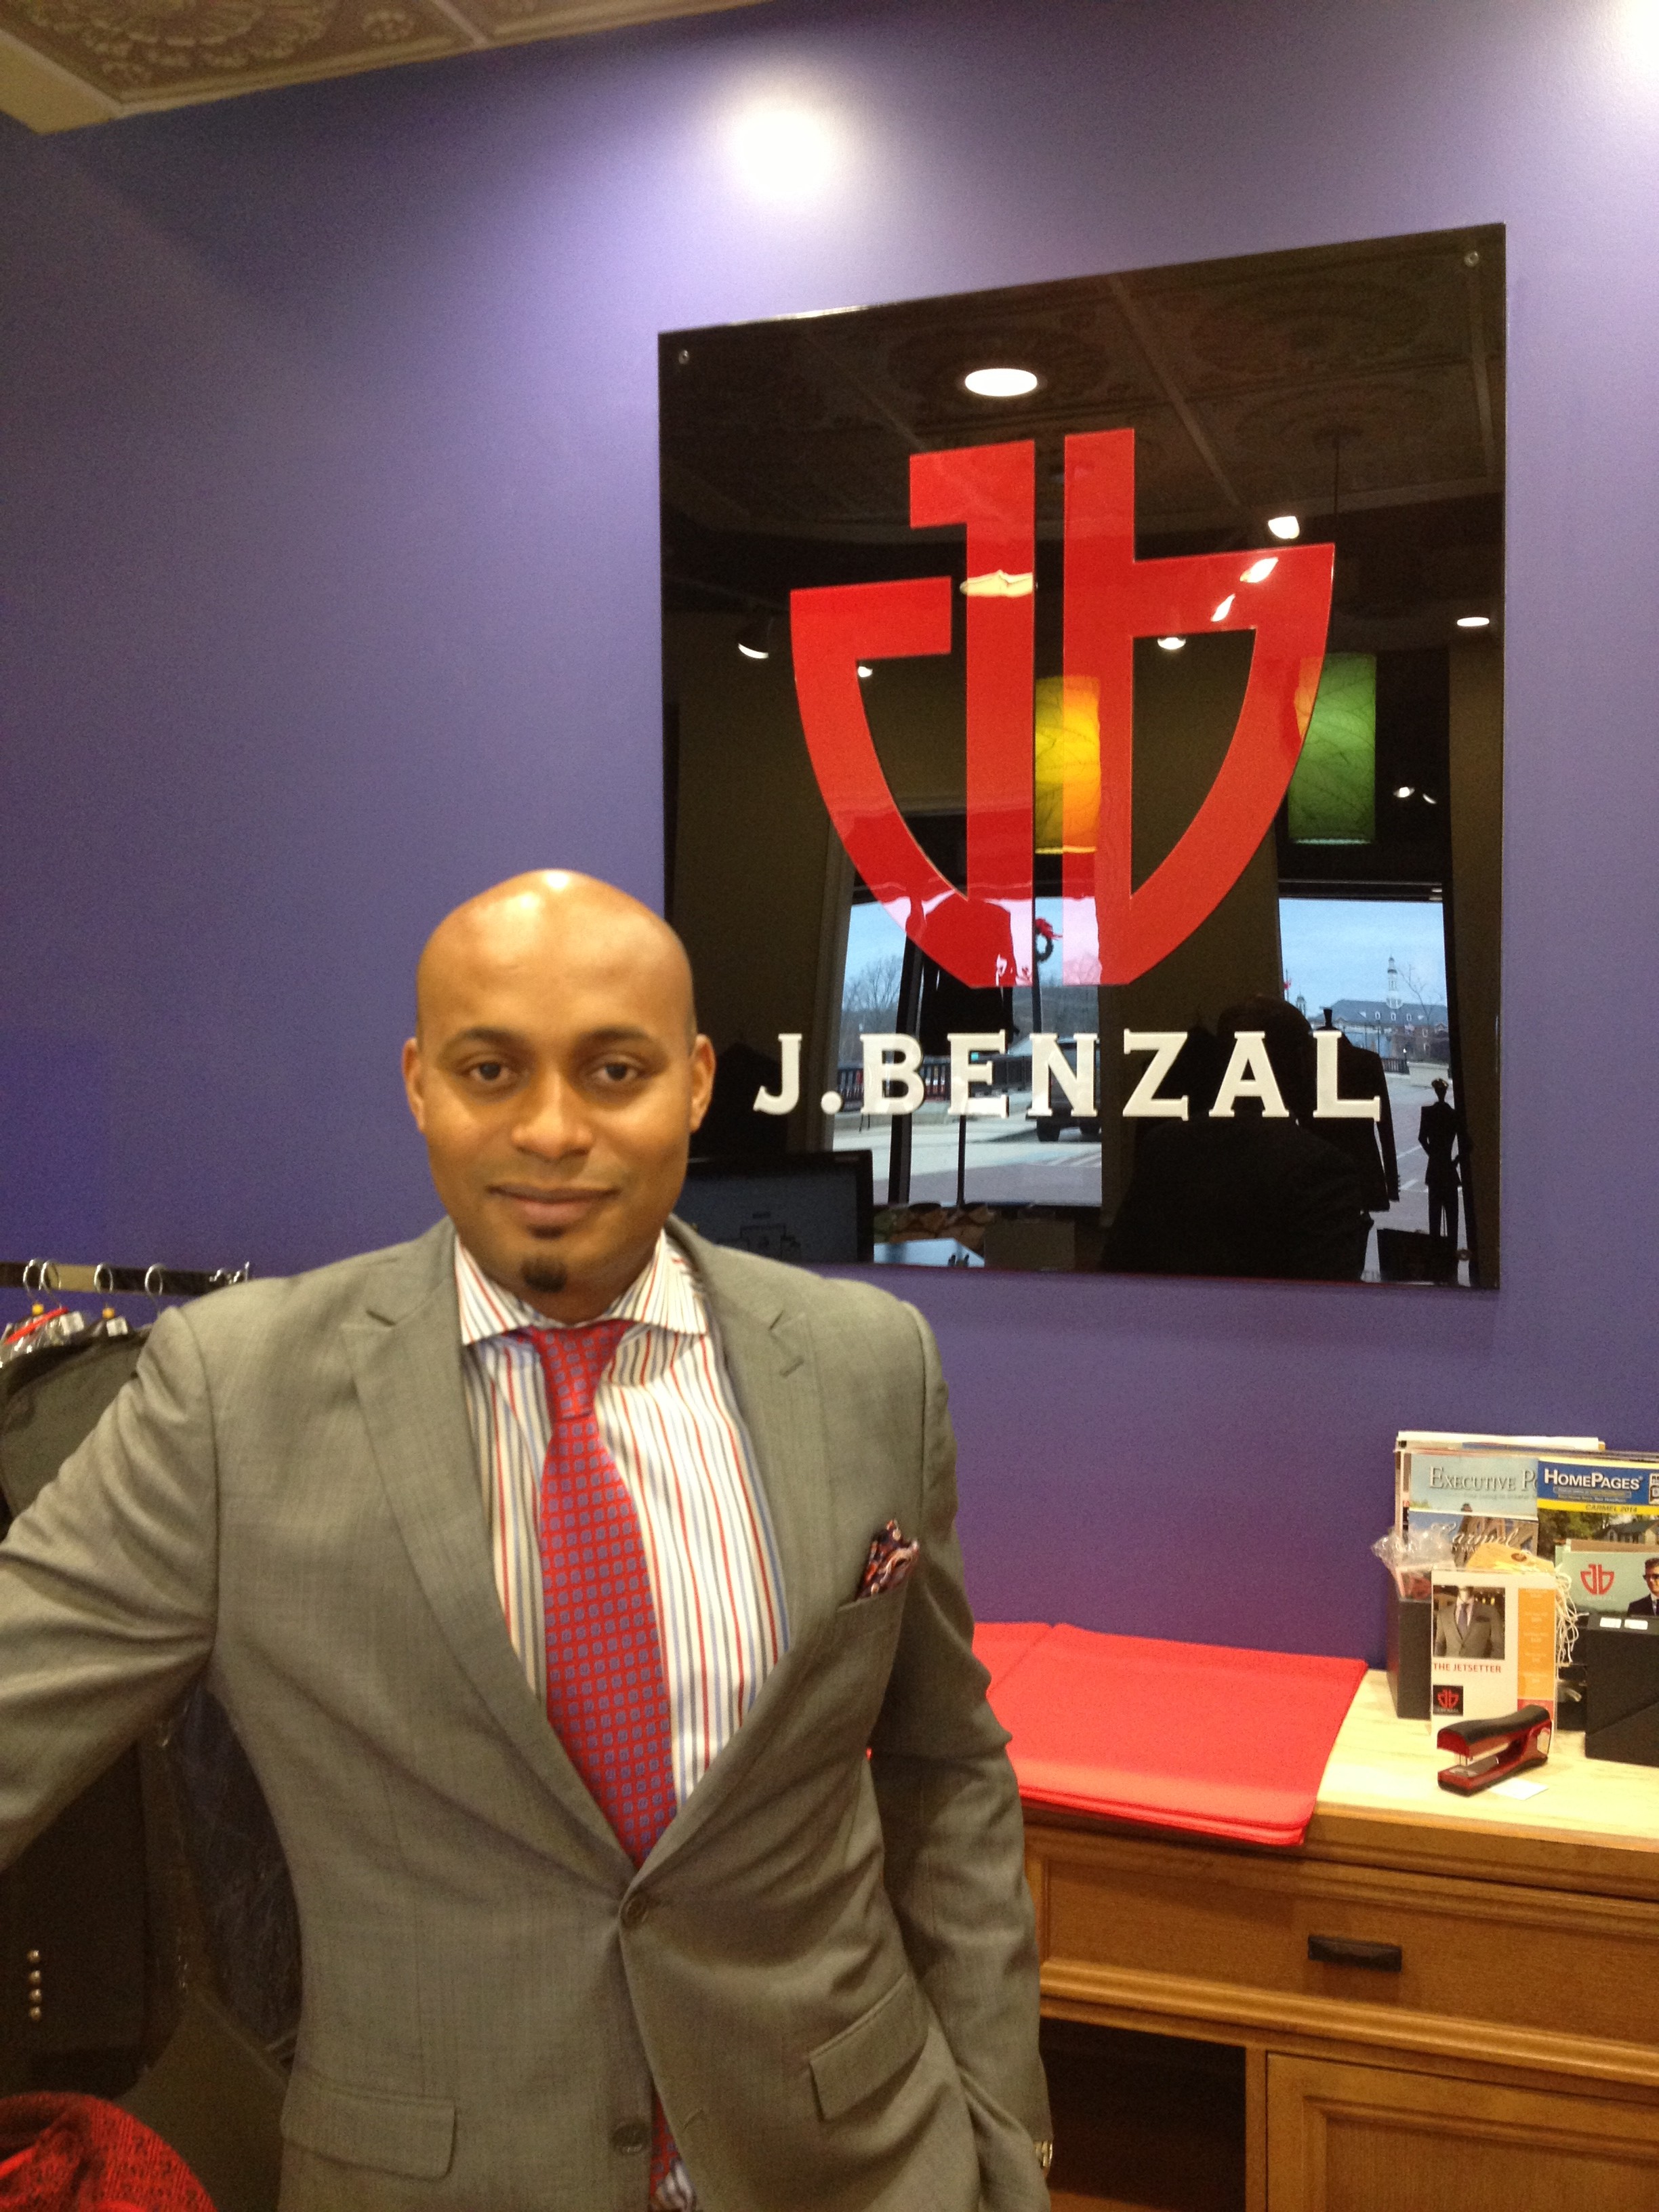 JBenzal owner designer Mamadou Ben Diallo in front of store sign e1418693173229